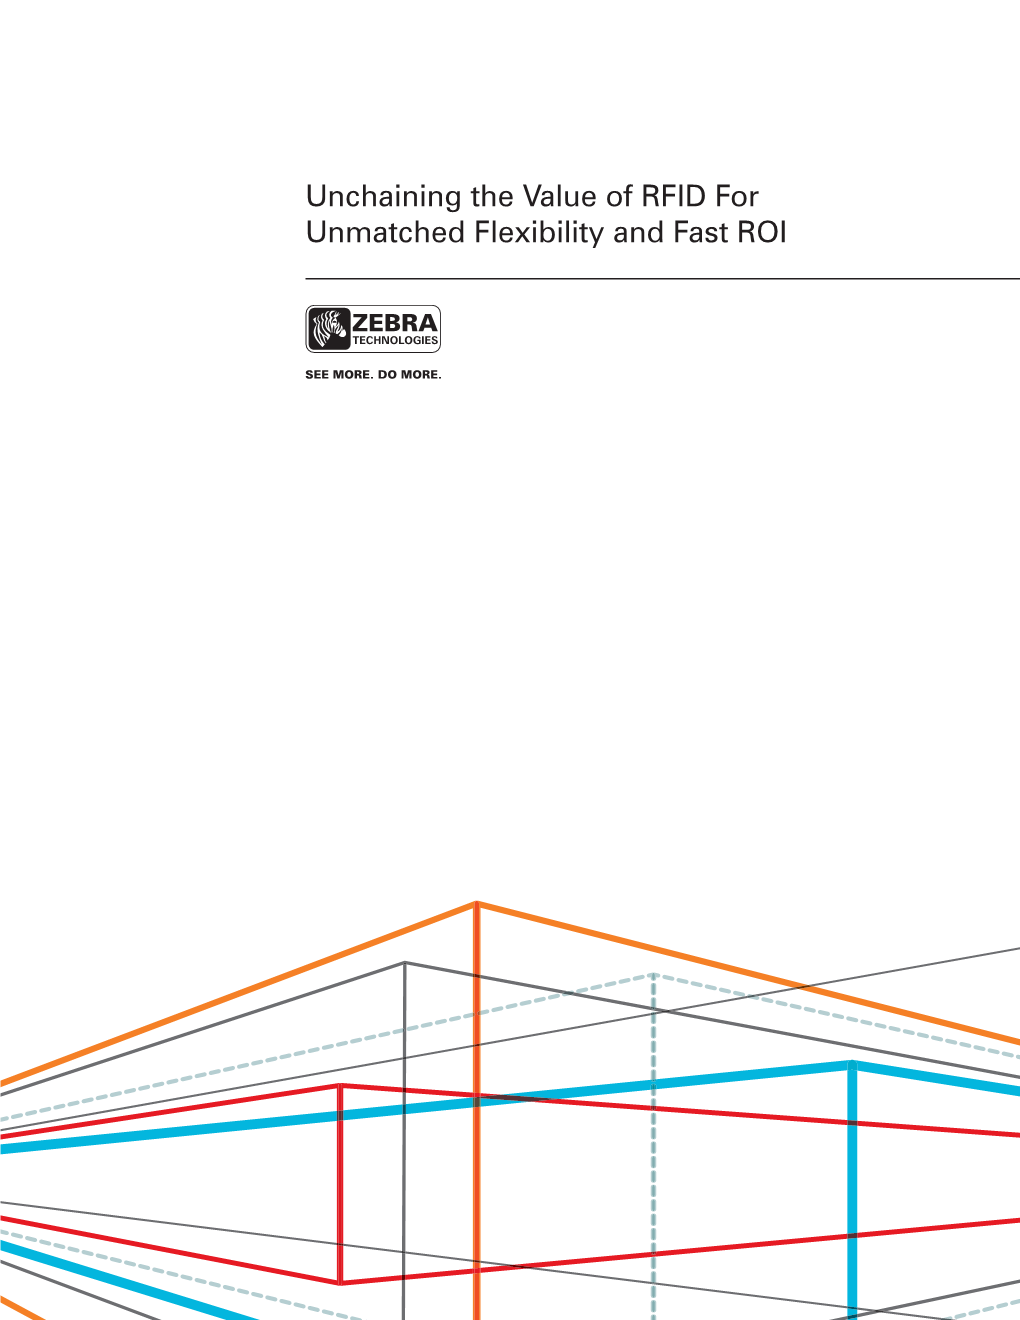 Unchaining the Value of RFID for Unmatched Flexibility and Fast ROI EXECUTIVE SUMMARY